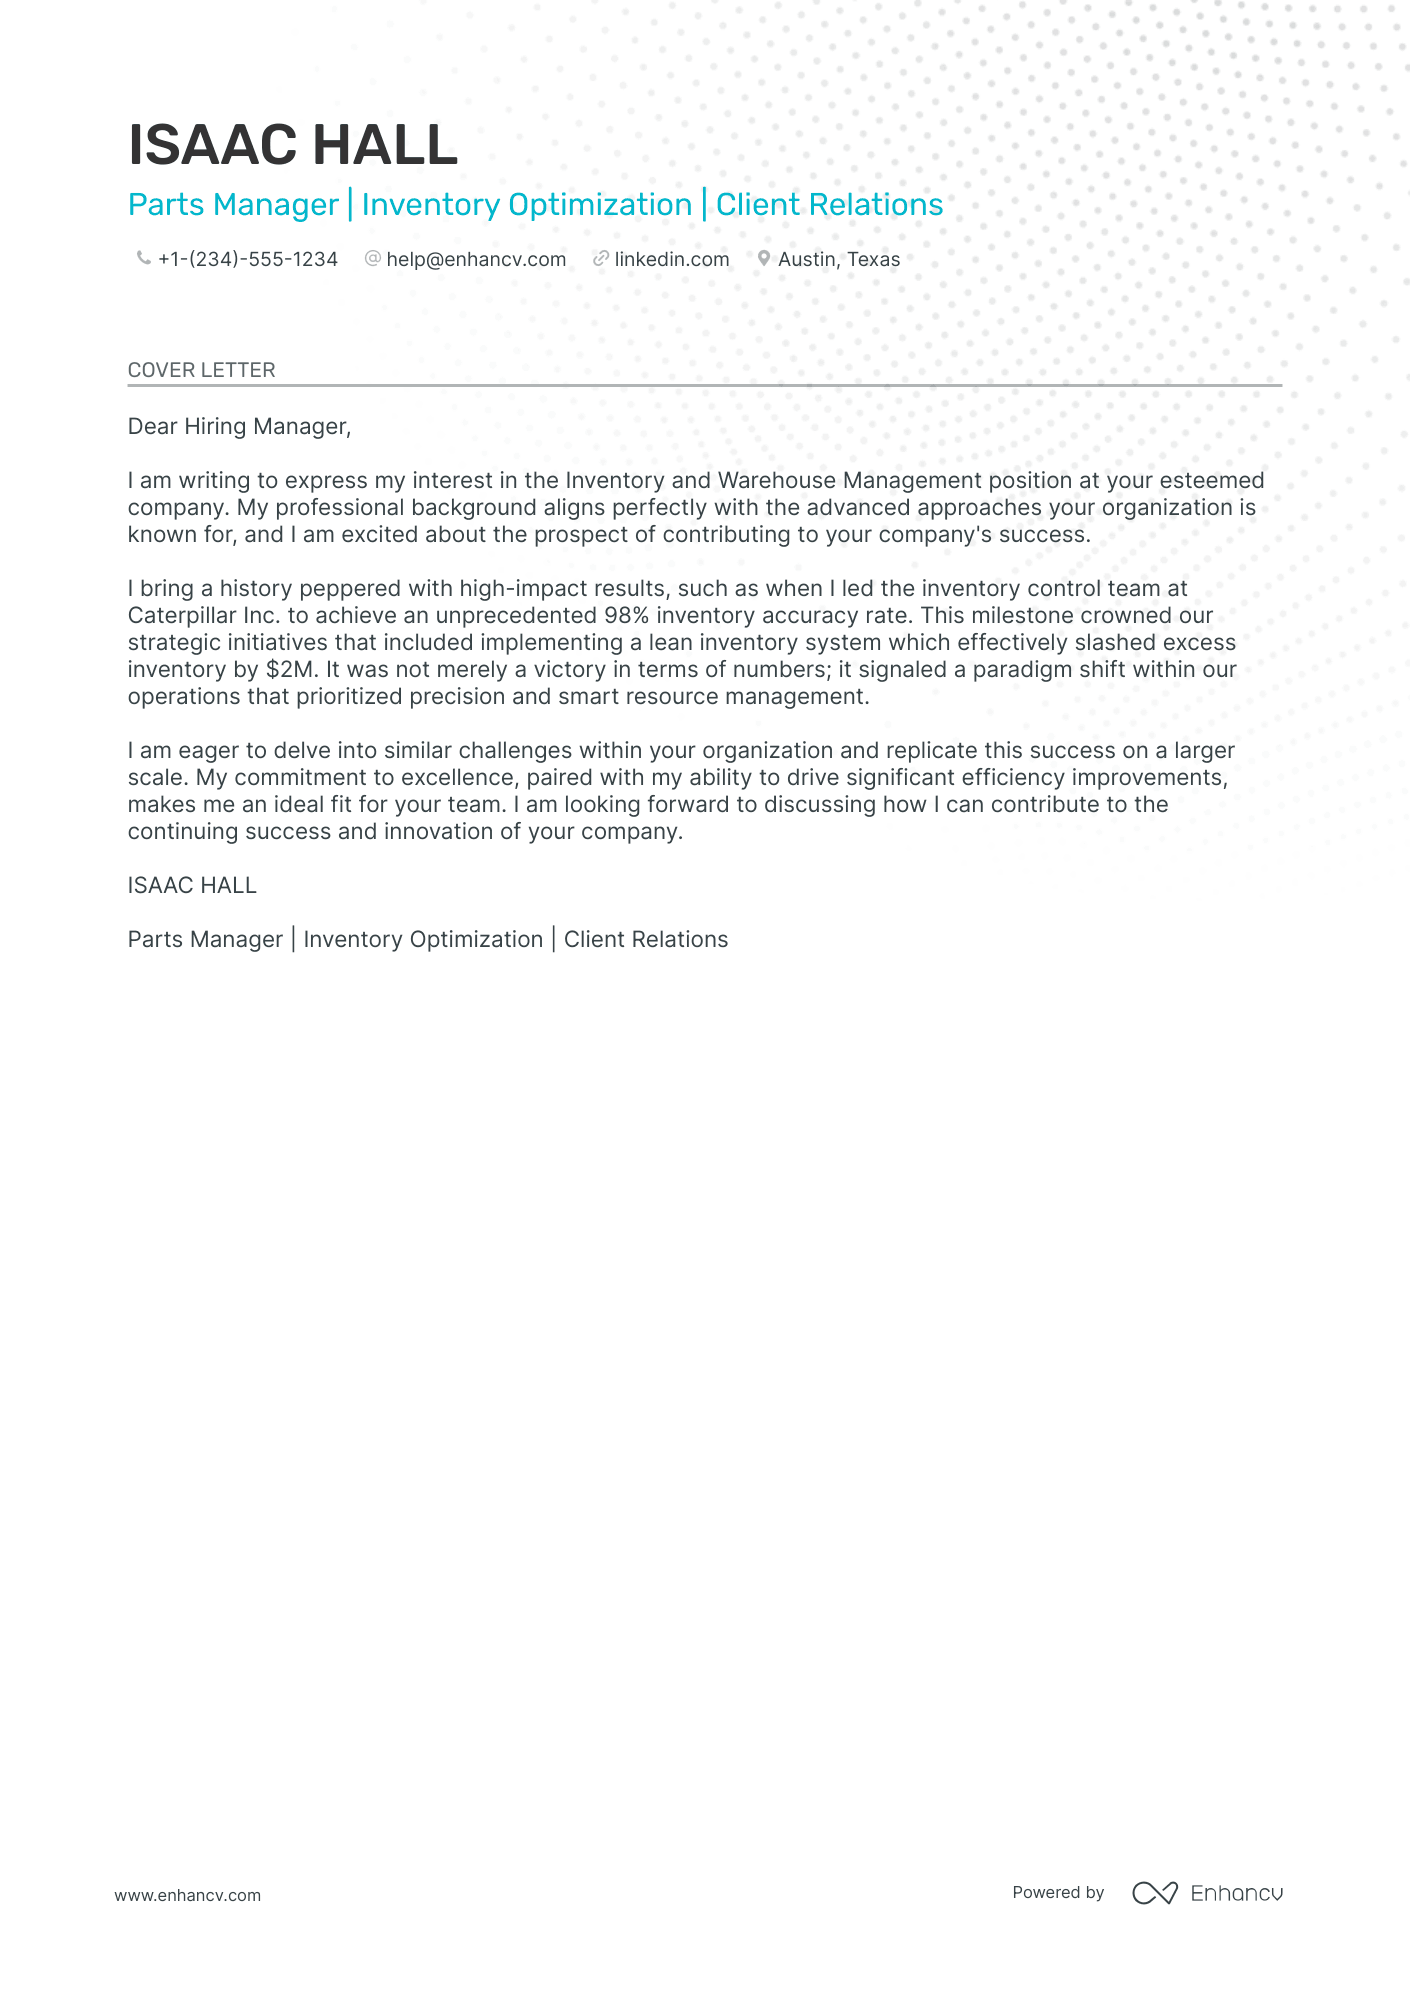 Parts Manager cover letter